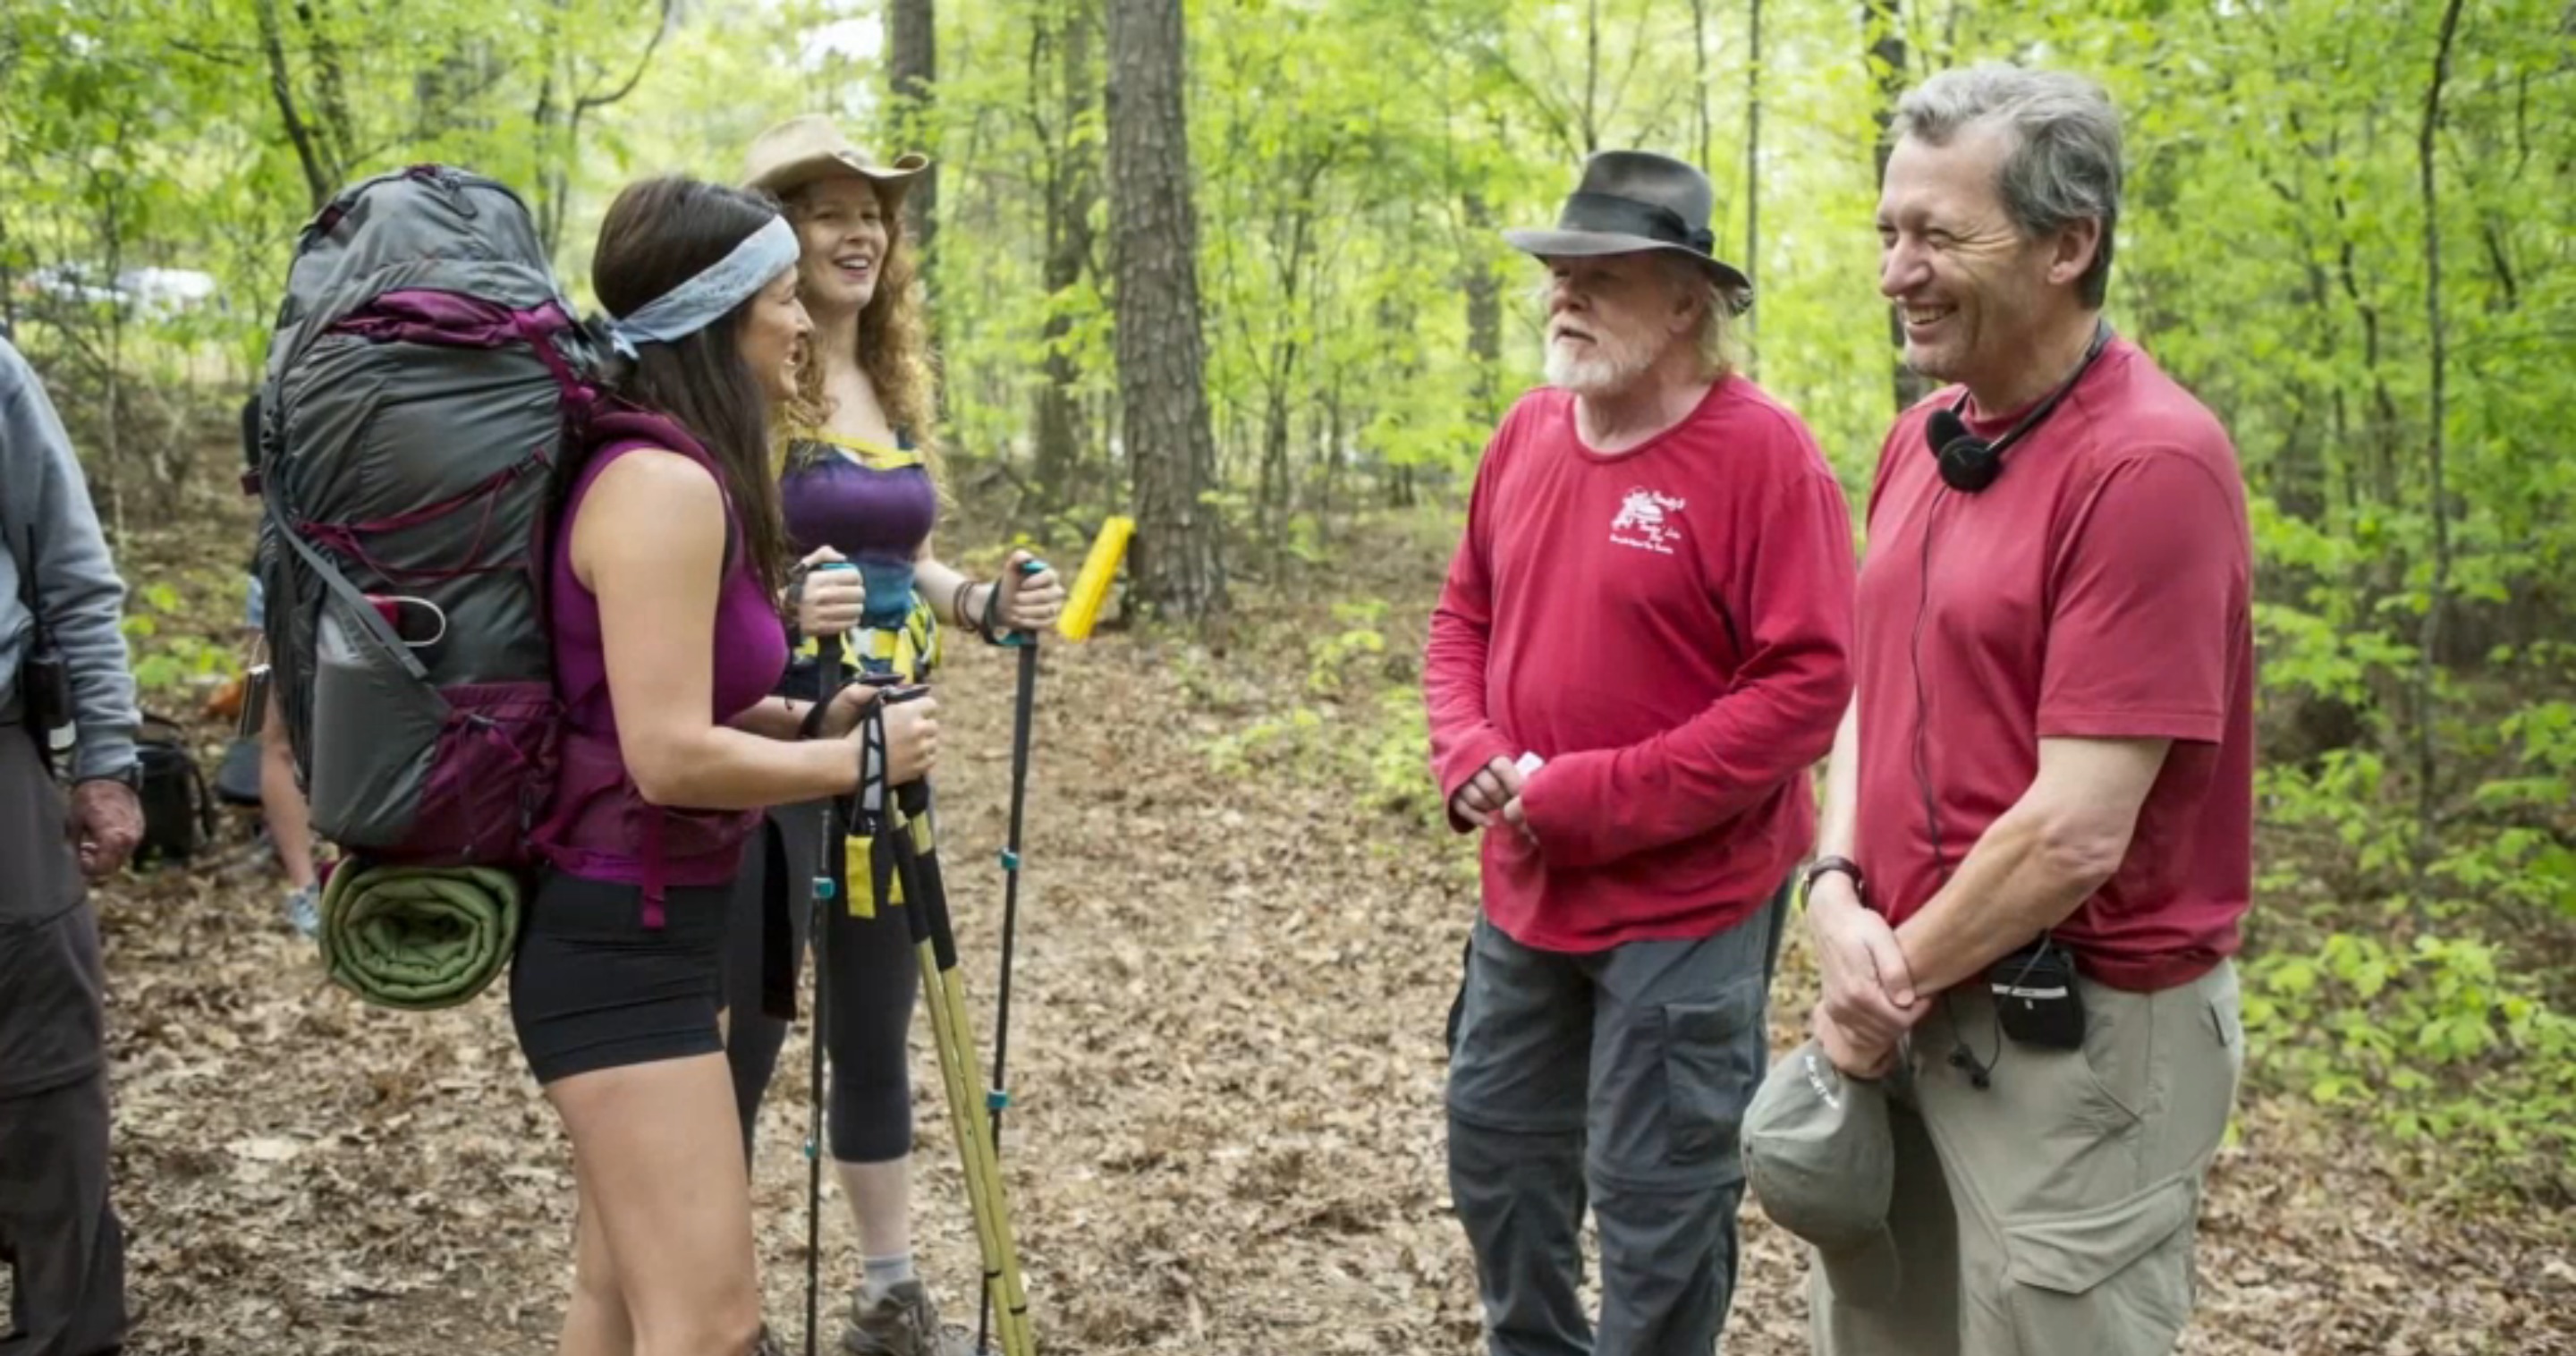 Rachel Woodhouse with Nick Nolte, Ken Kwapis, and Katie Groshong on A Walk in the Woods